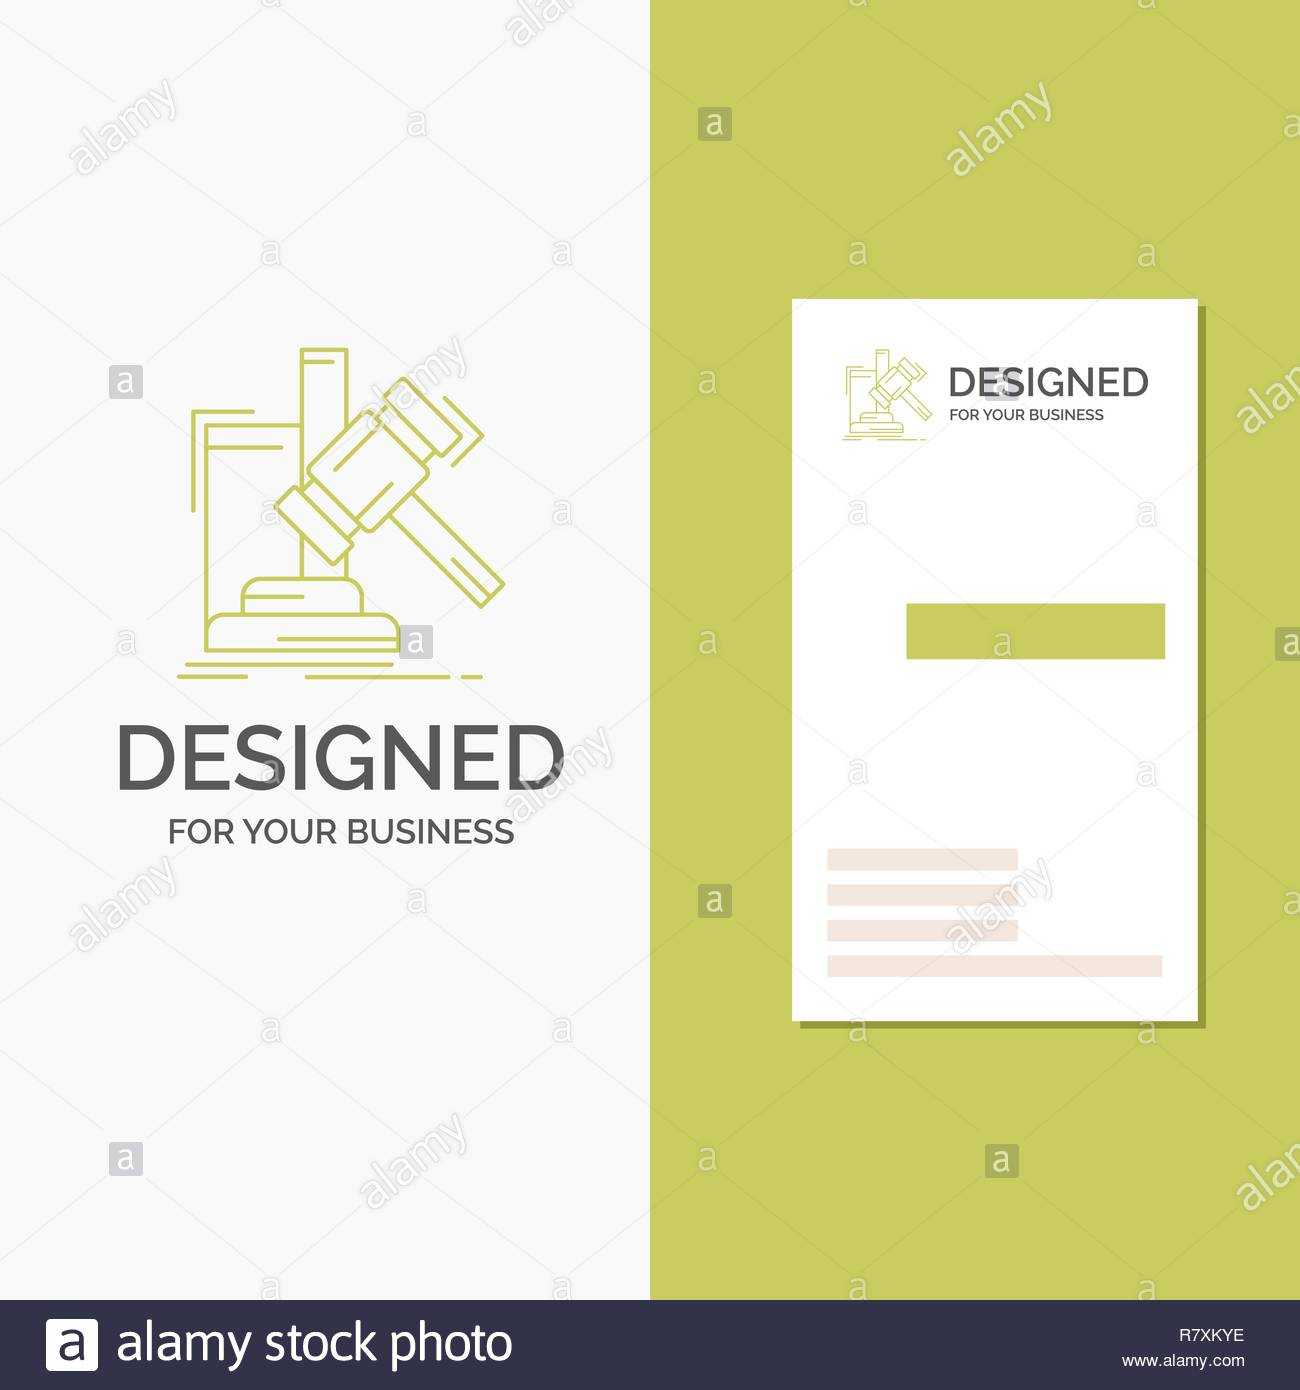 Business Logo For Auction, Gavel, Hammer, Judgement, Law Intended For Auction Bid Cards Template